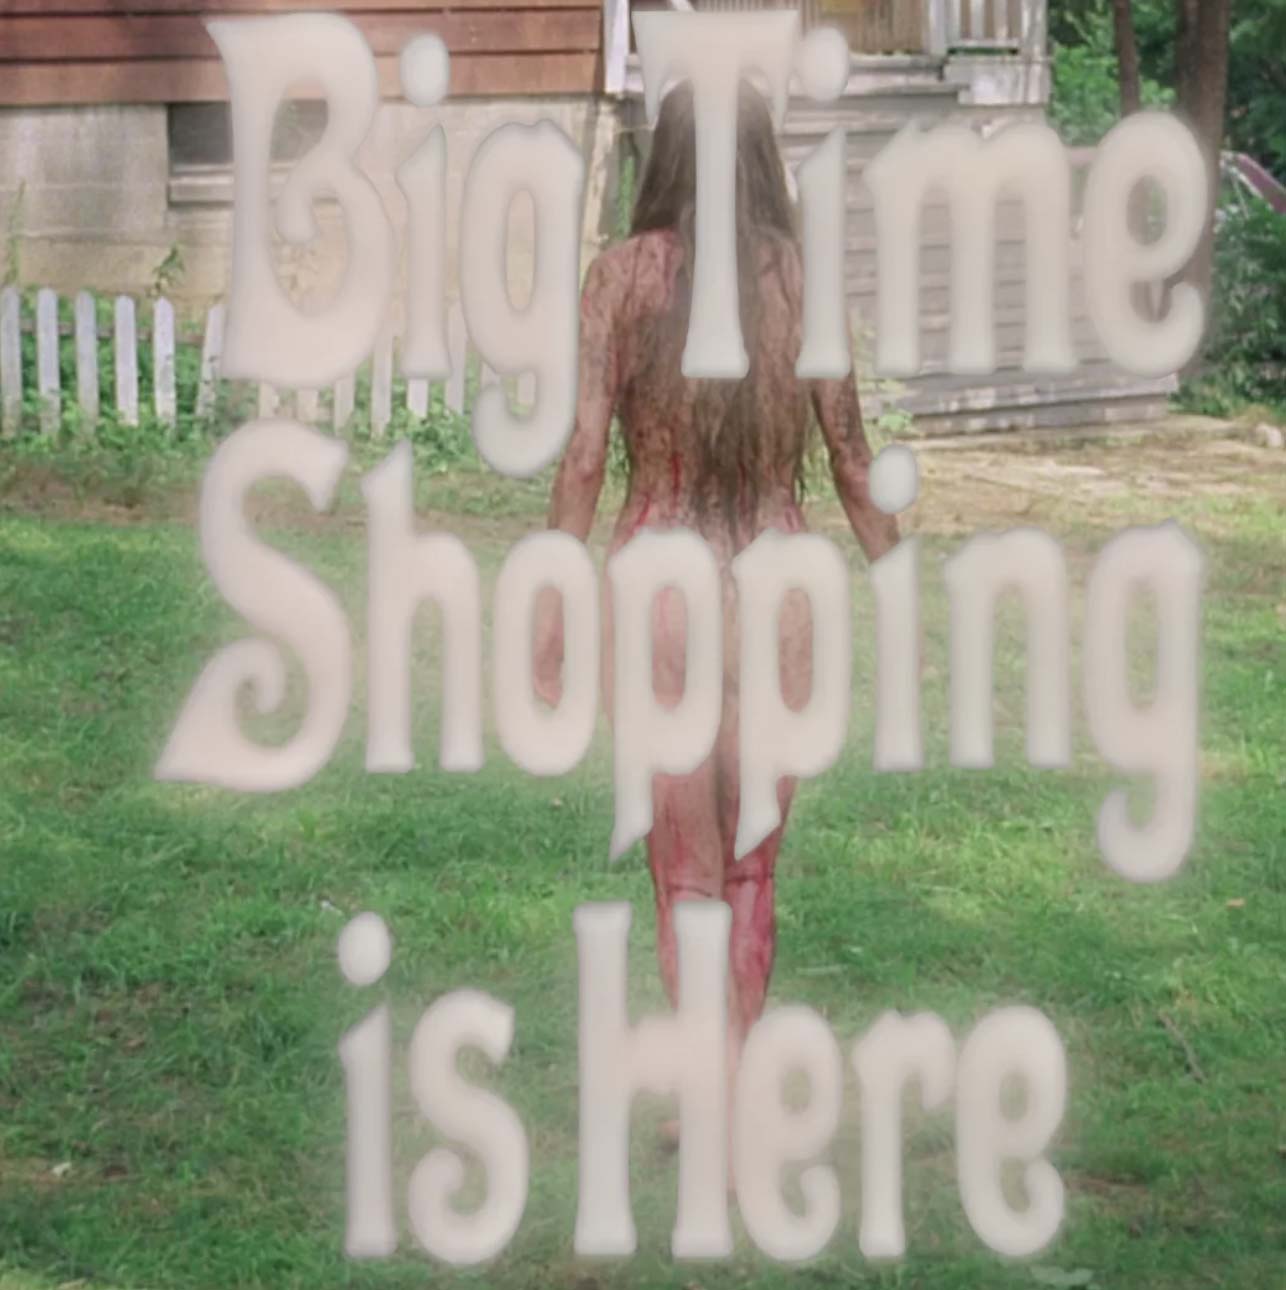 Big Time Shopping is here: Michelle Uckotter